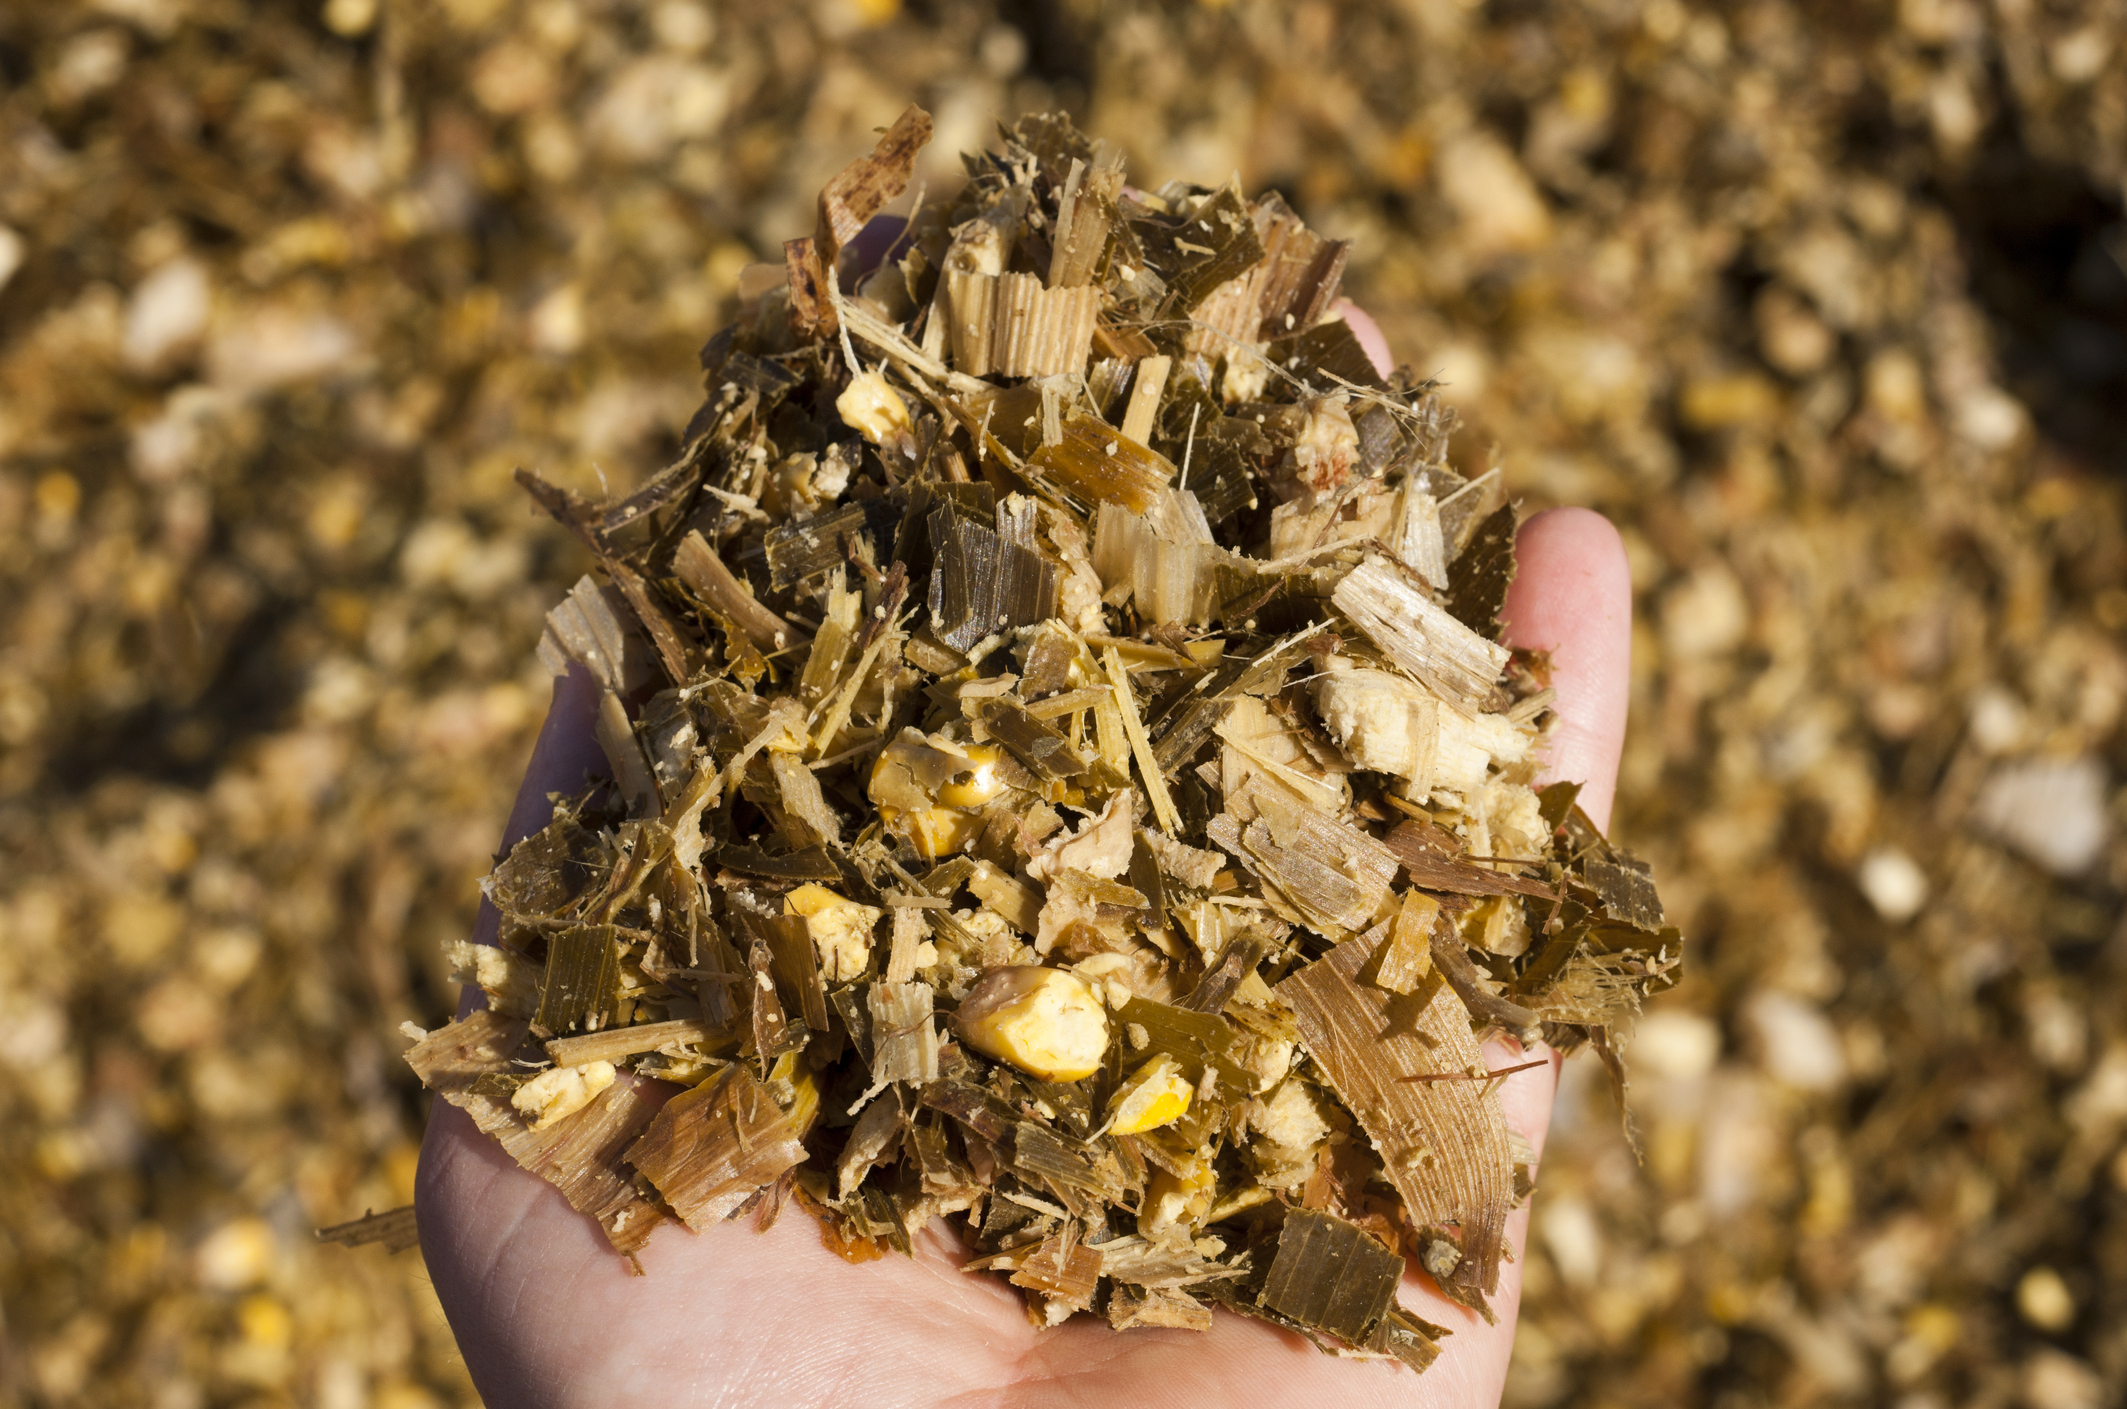 Corn silage is an underutilized feed source for beef cattle, and the right practices and equipment during storage can add value to any operation.